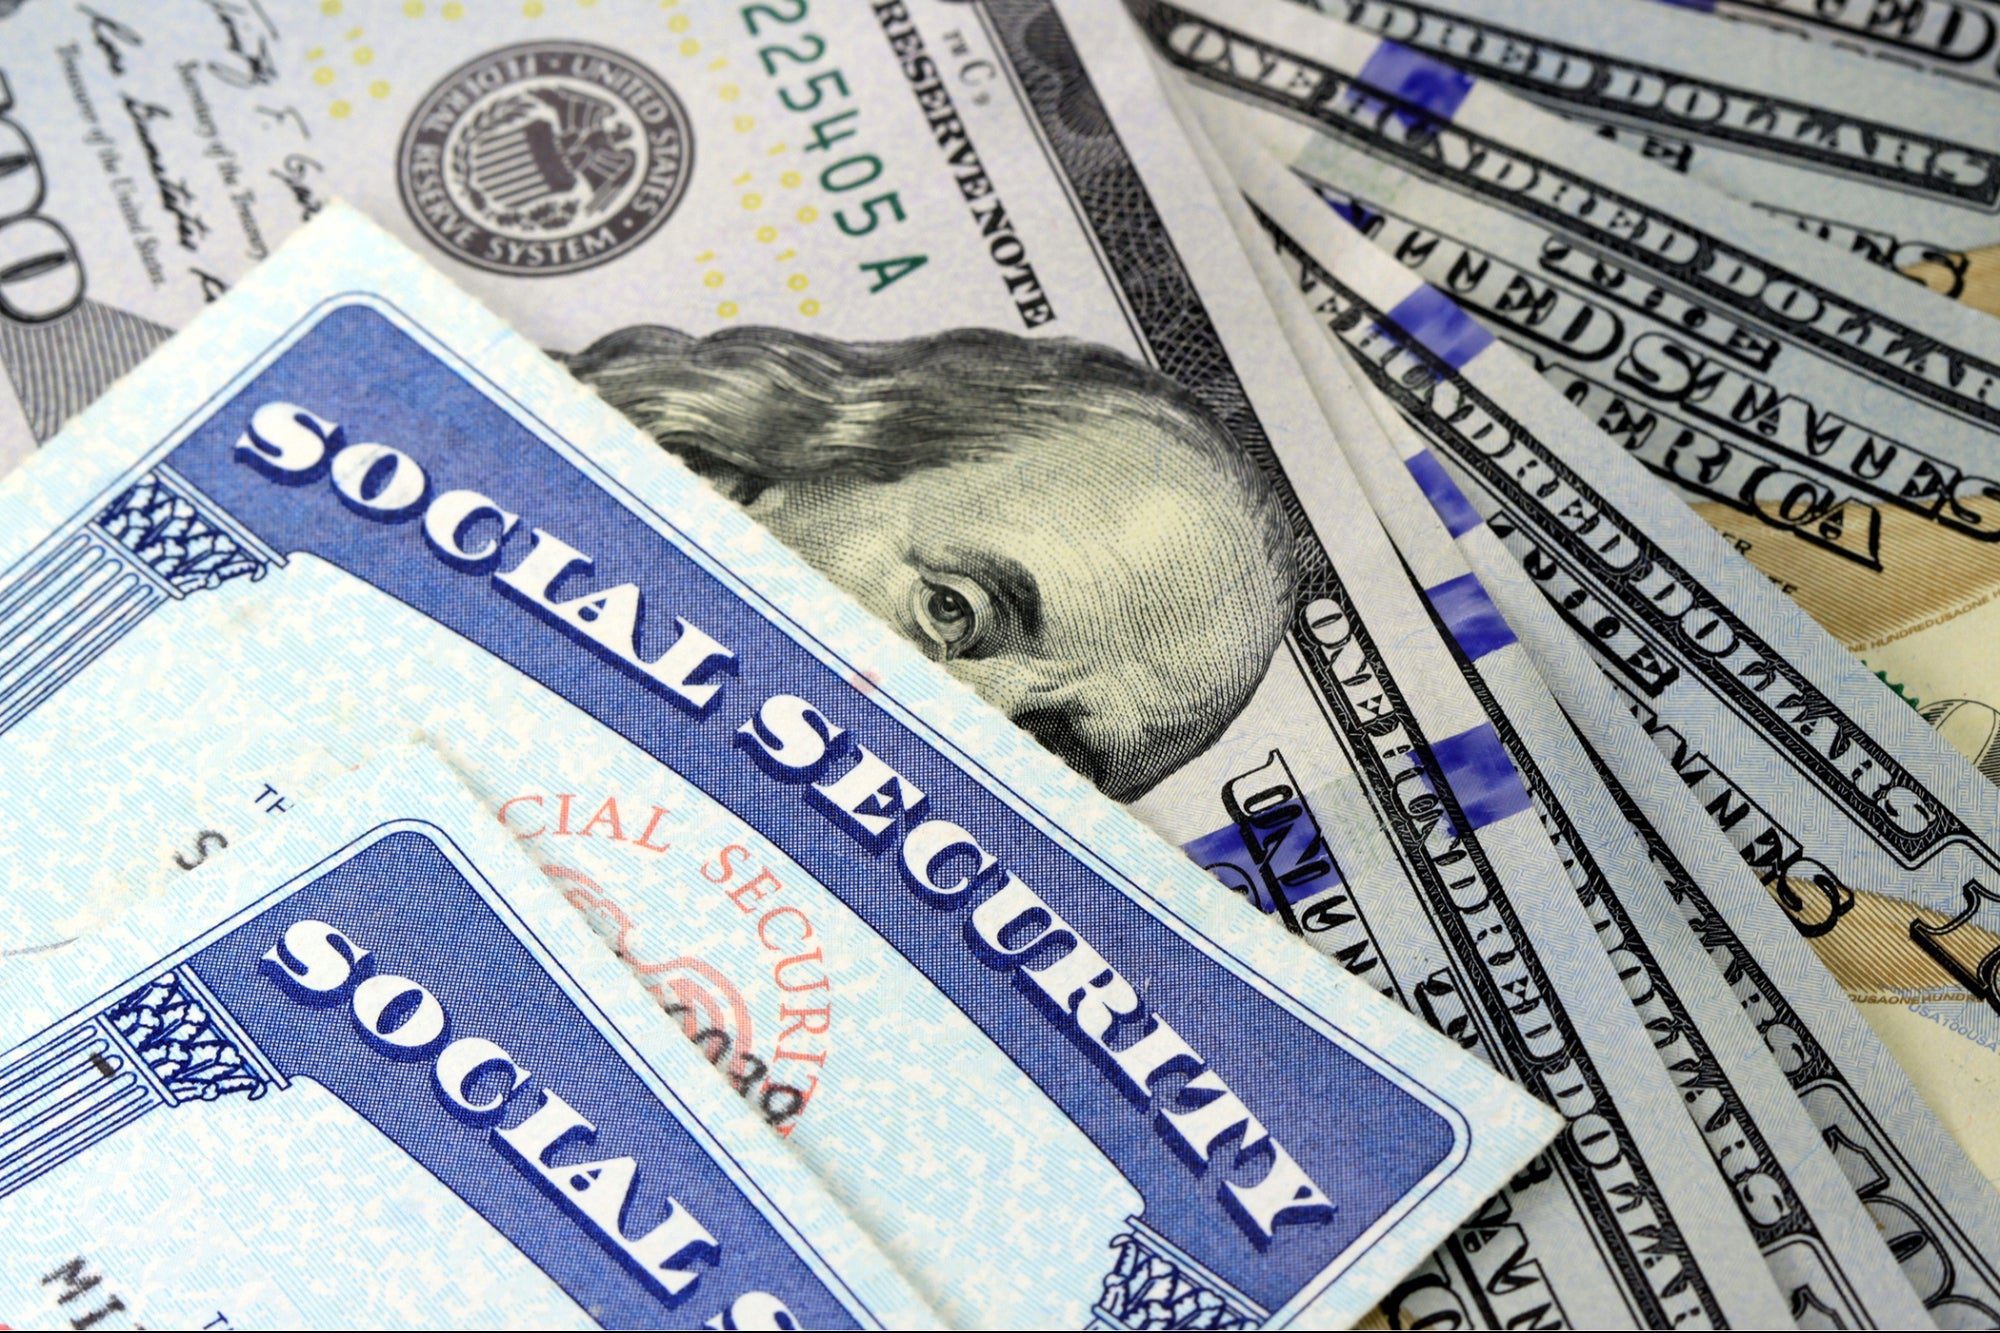 Social Security Card and Money